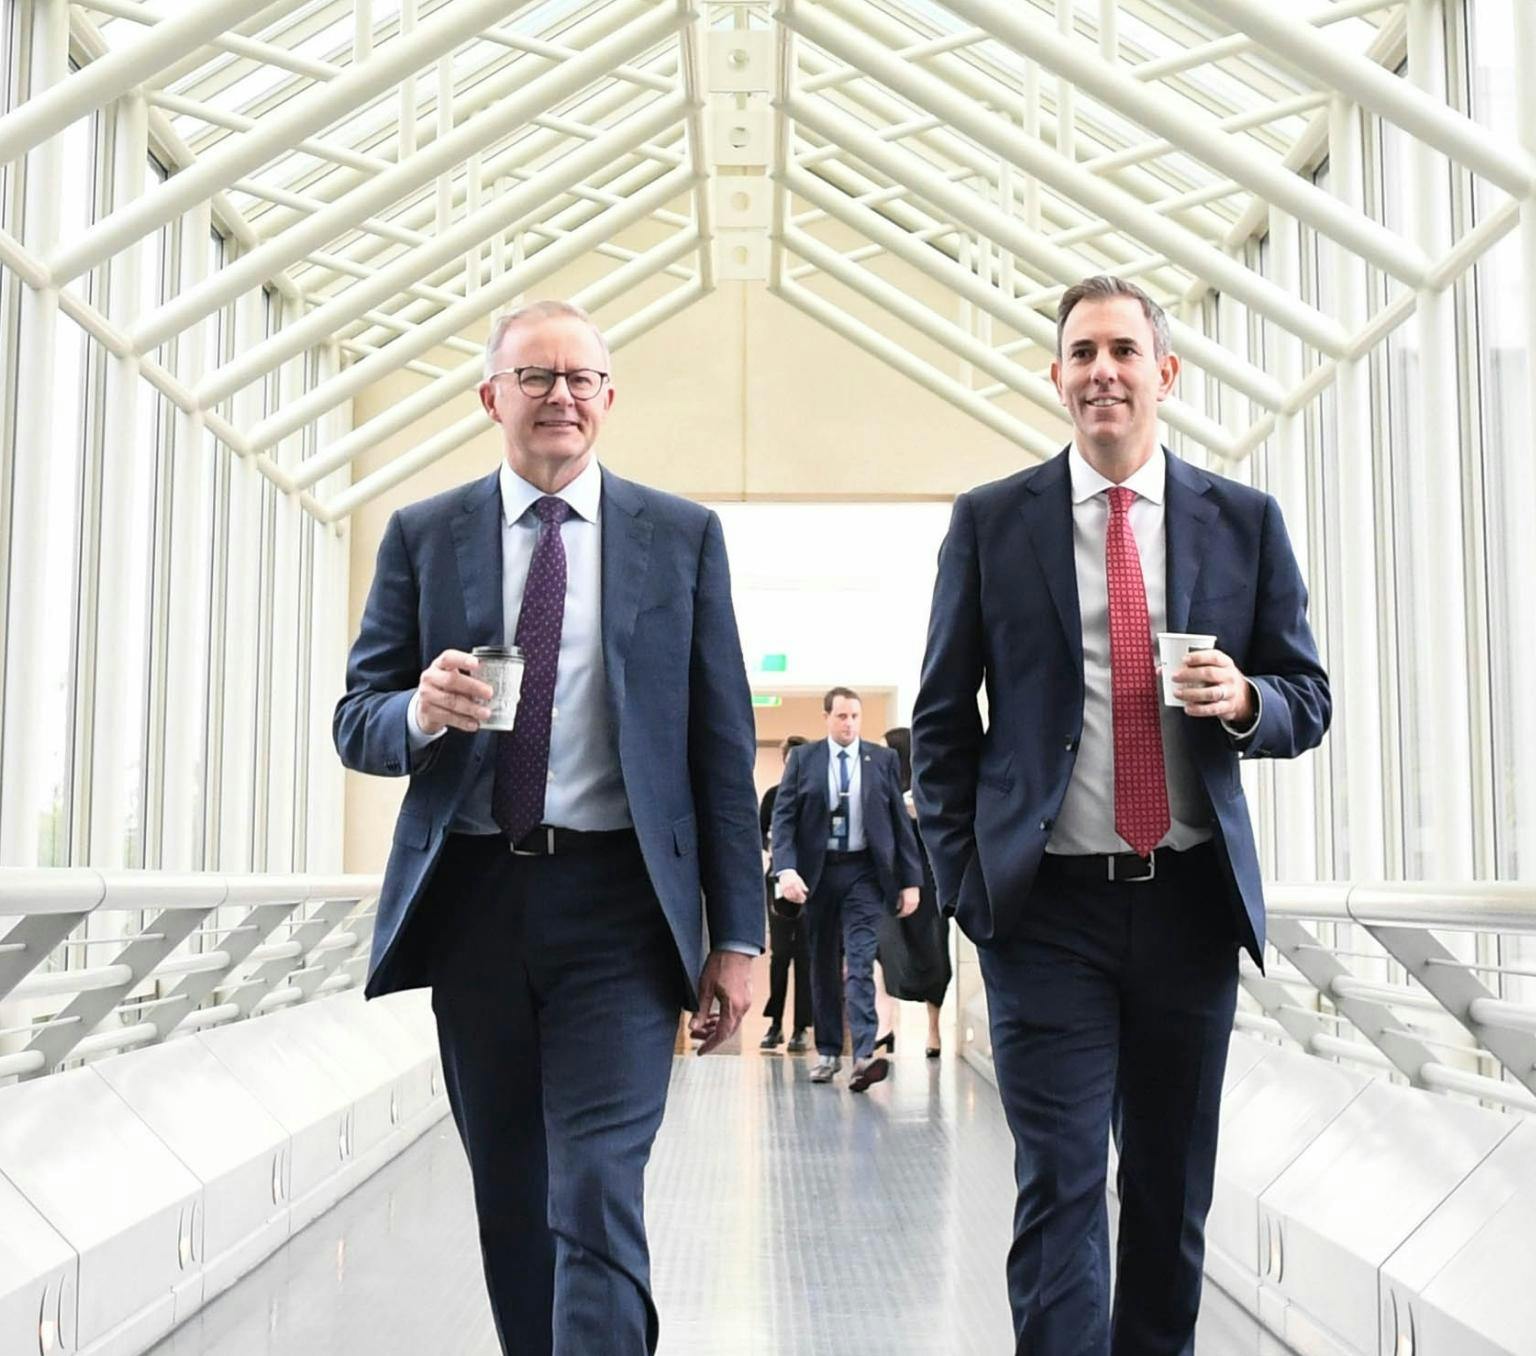 Two men in suits walk down a hallway that has big glass windows and a glass roof.